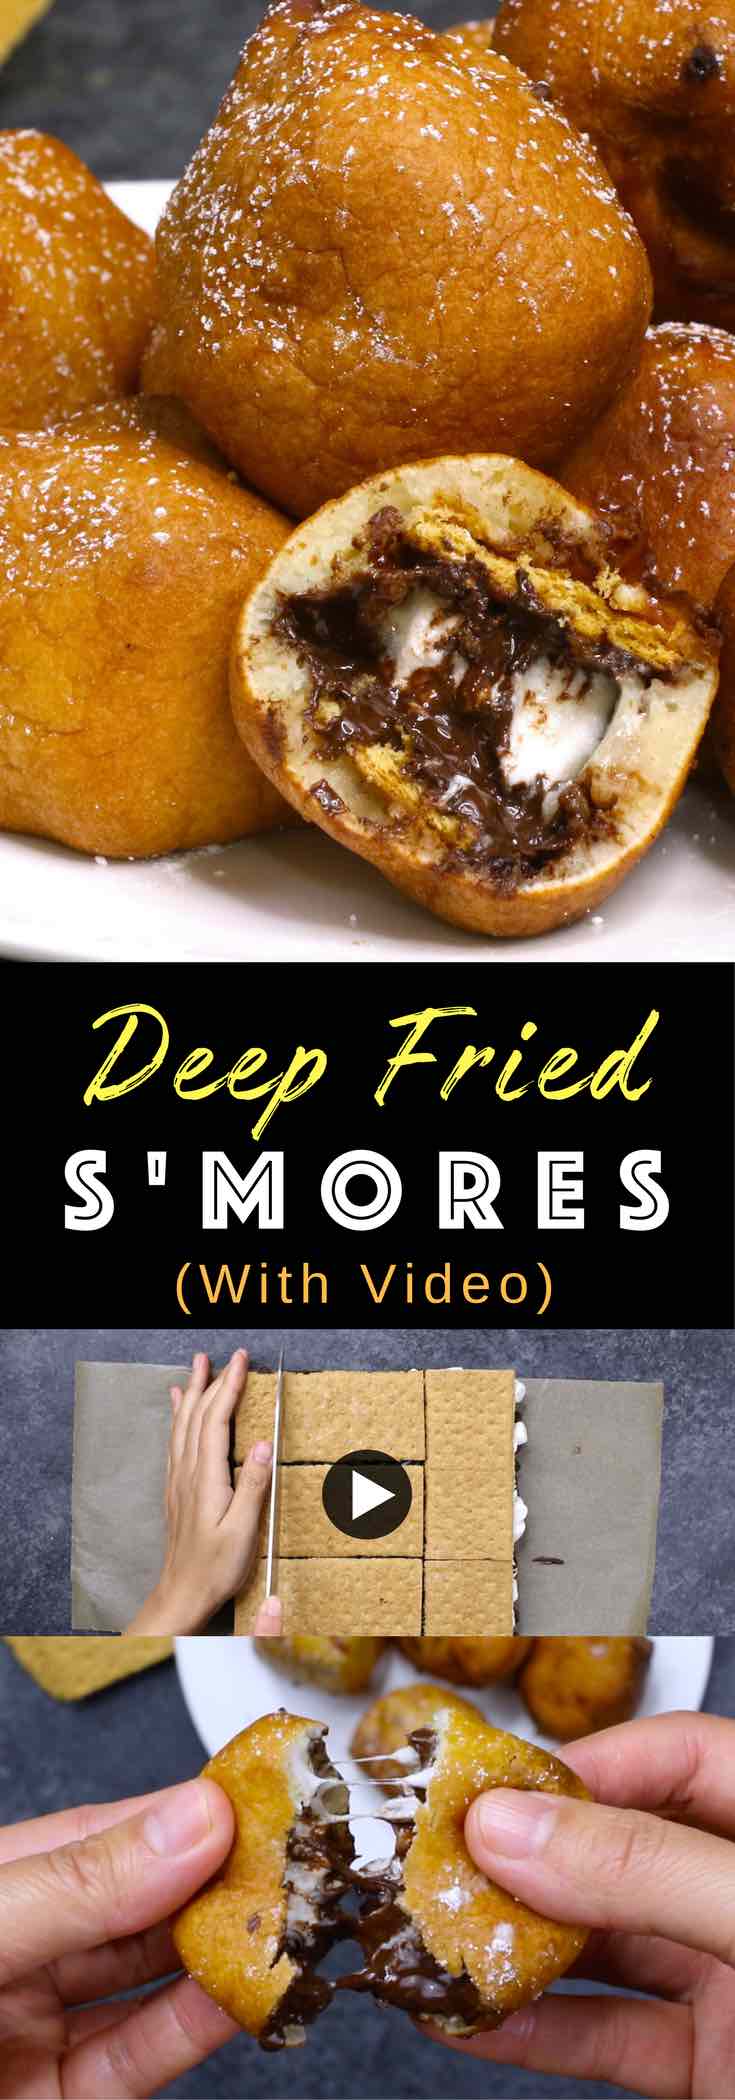 Deep Fried S’mores combine graham crackers, chocolate and marshmallows that are battered and fried to golden, fluffy perfection! Perfect for a party! #friedsmores